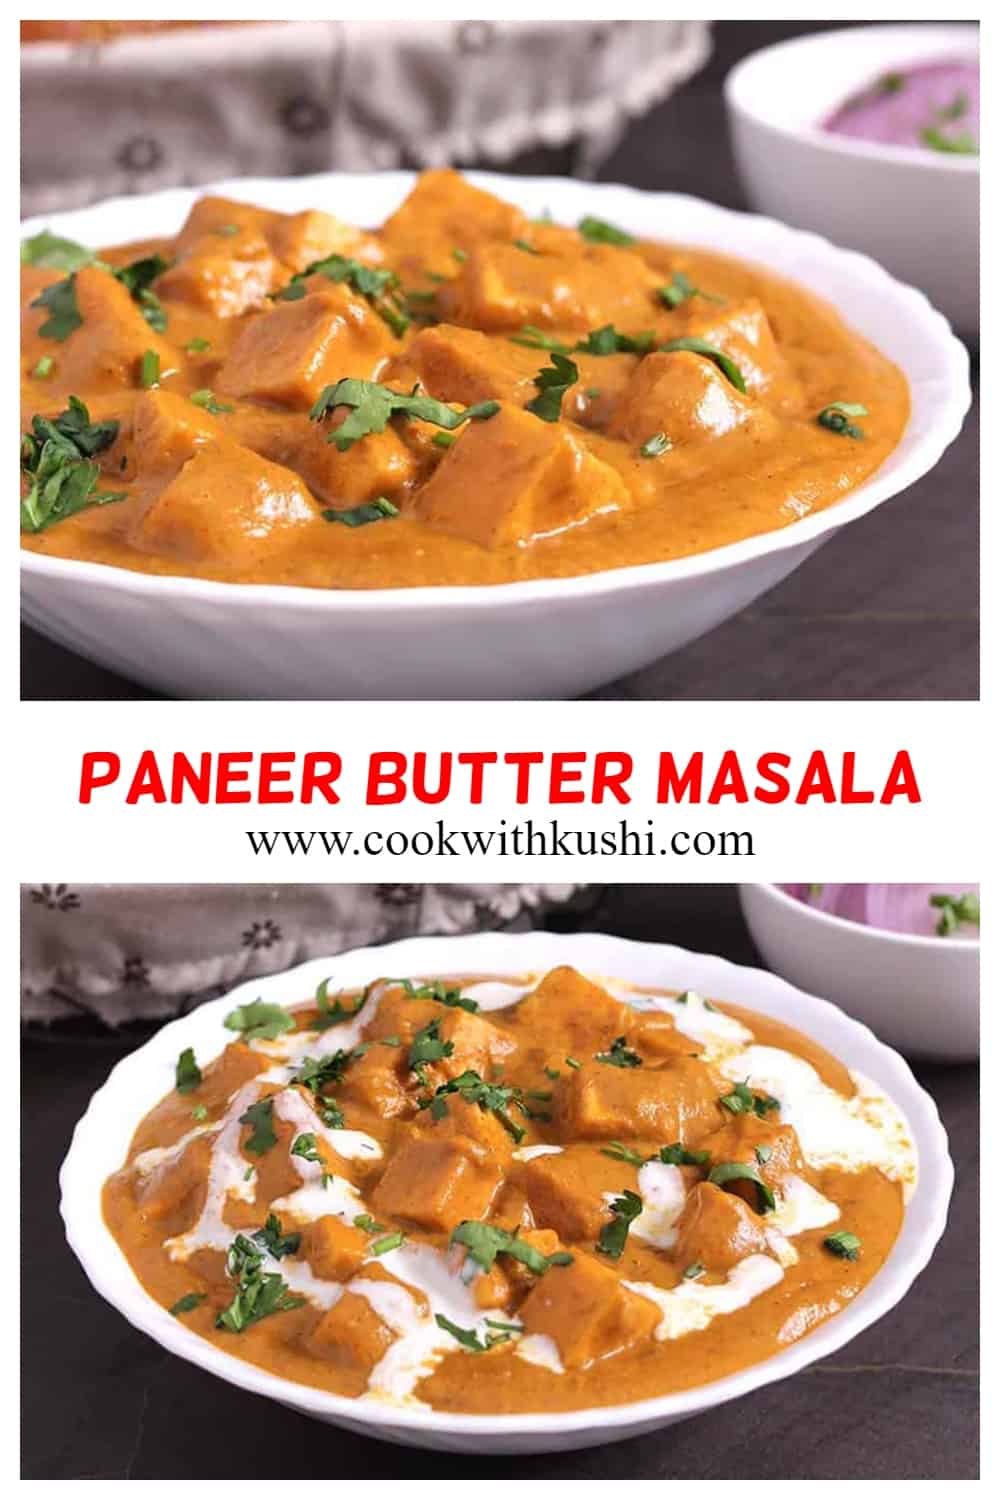 This is a collage where the top image consists of paneer butter masala garnished with cilantro served in a white bowl. The picture at the bottom consists of paneer butter masala garnished with cilantro and cream served in a white bowl.